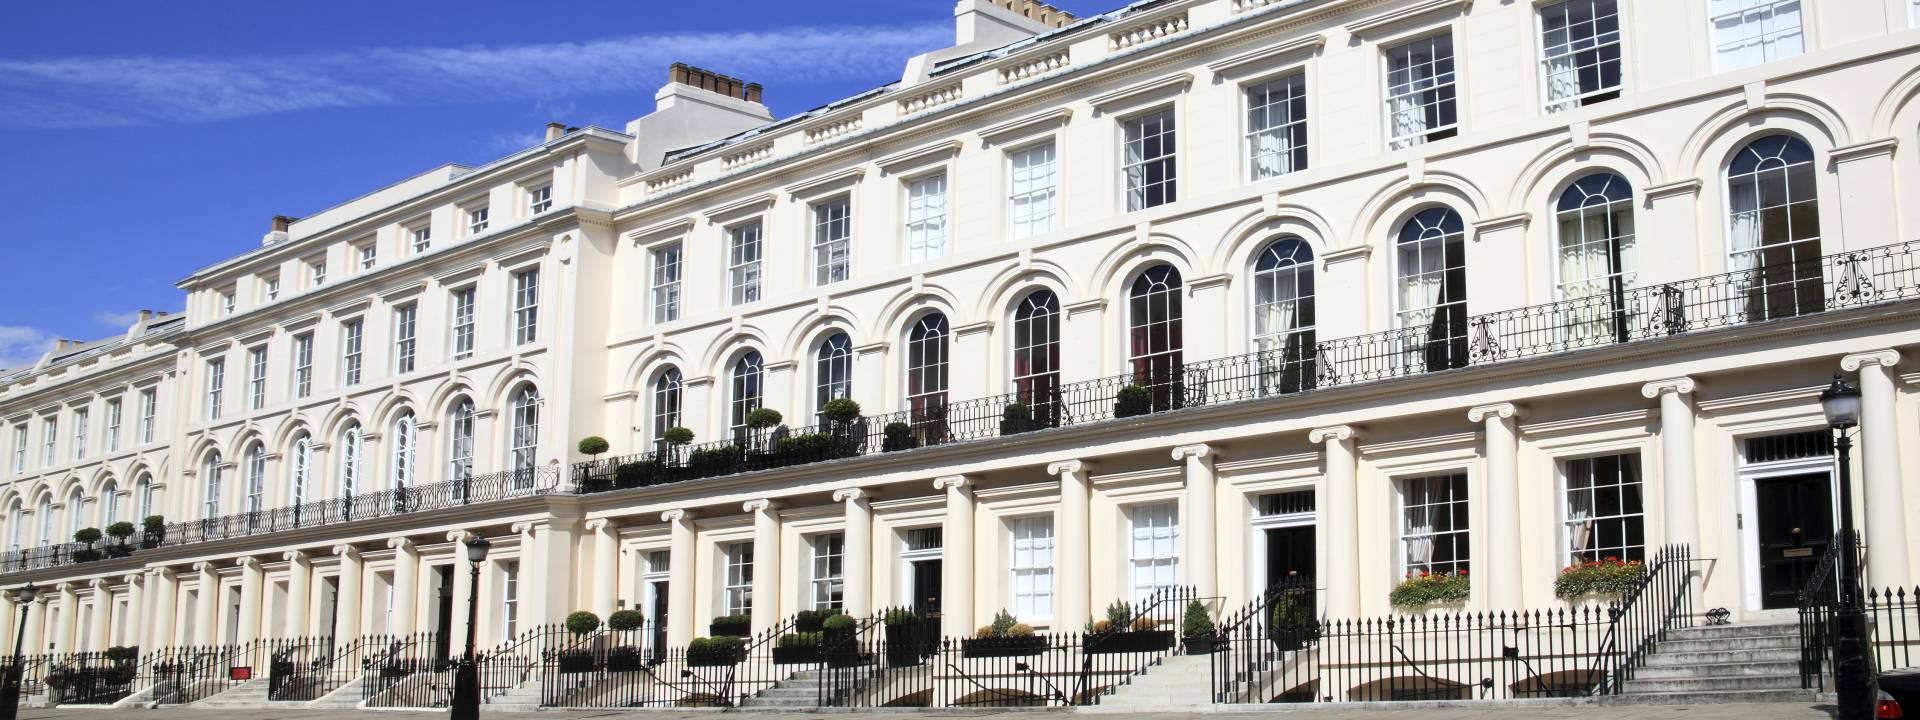 Exclusively tailored design for LONDON TOWNHOUSES